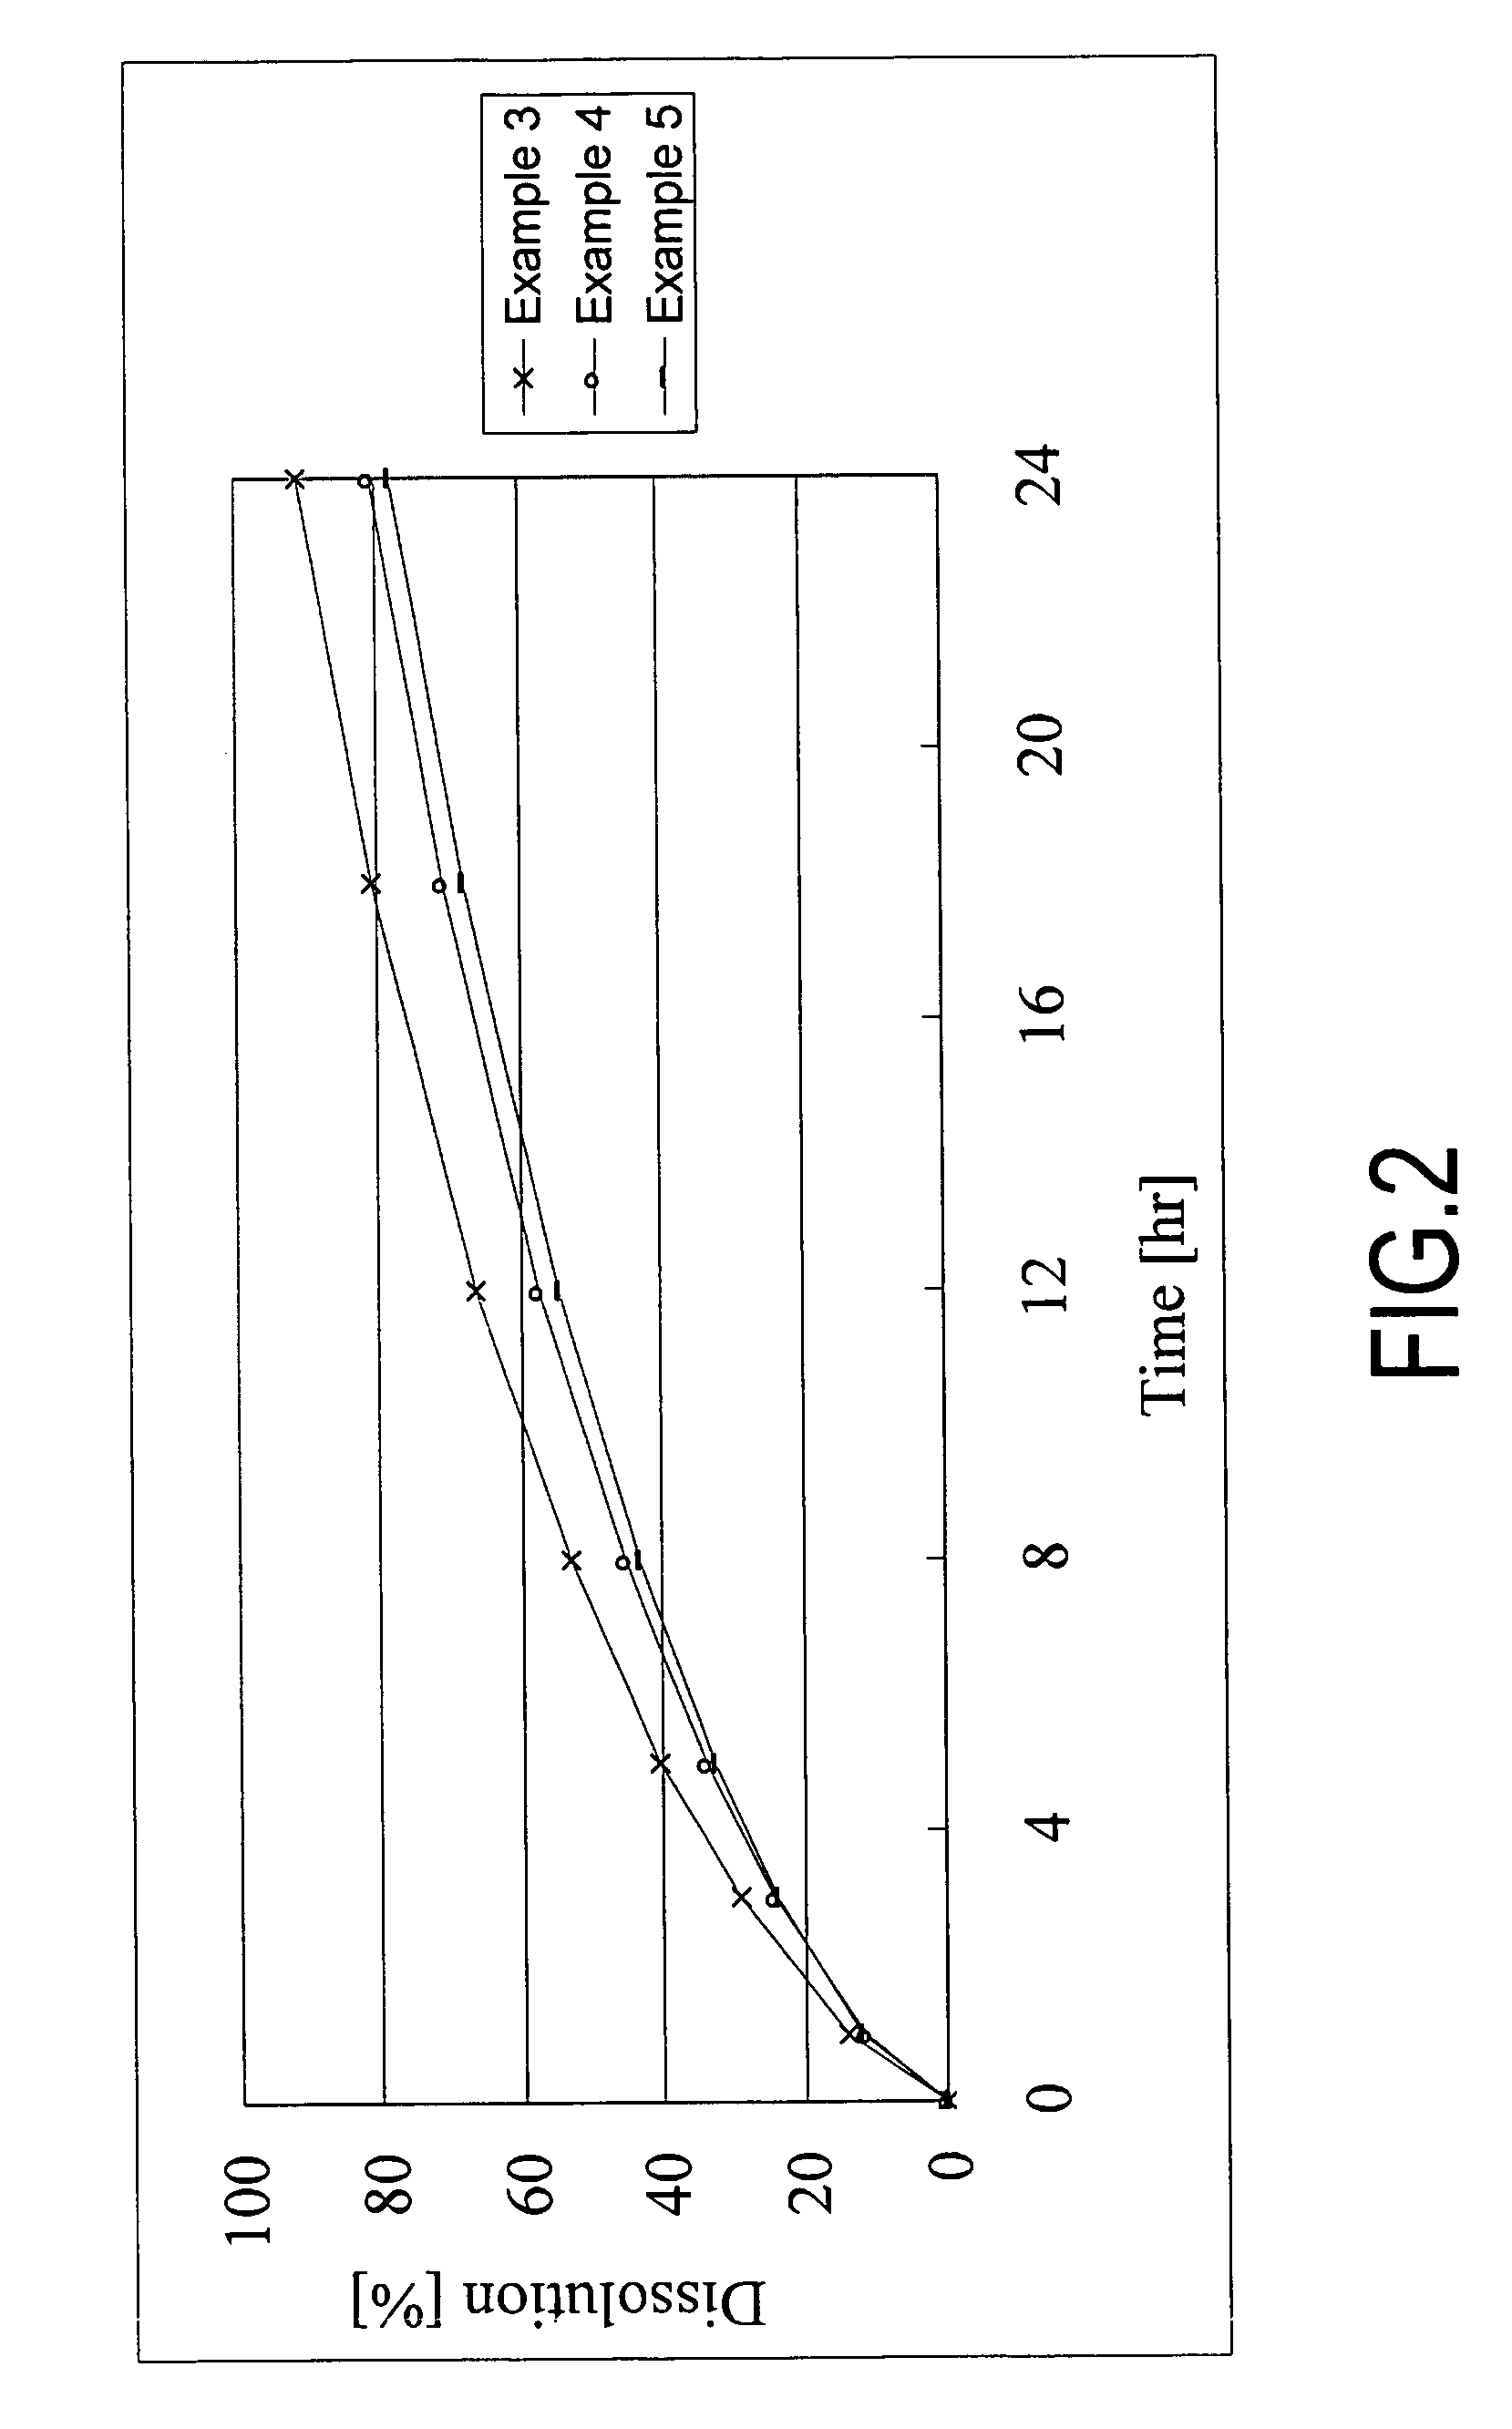 Sustained release alfuzosin hydrochl formulation and method for their production